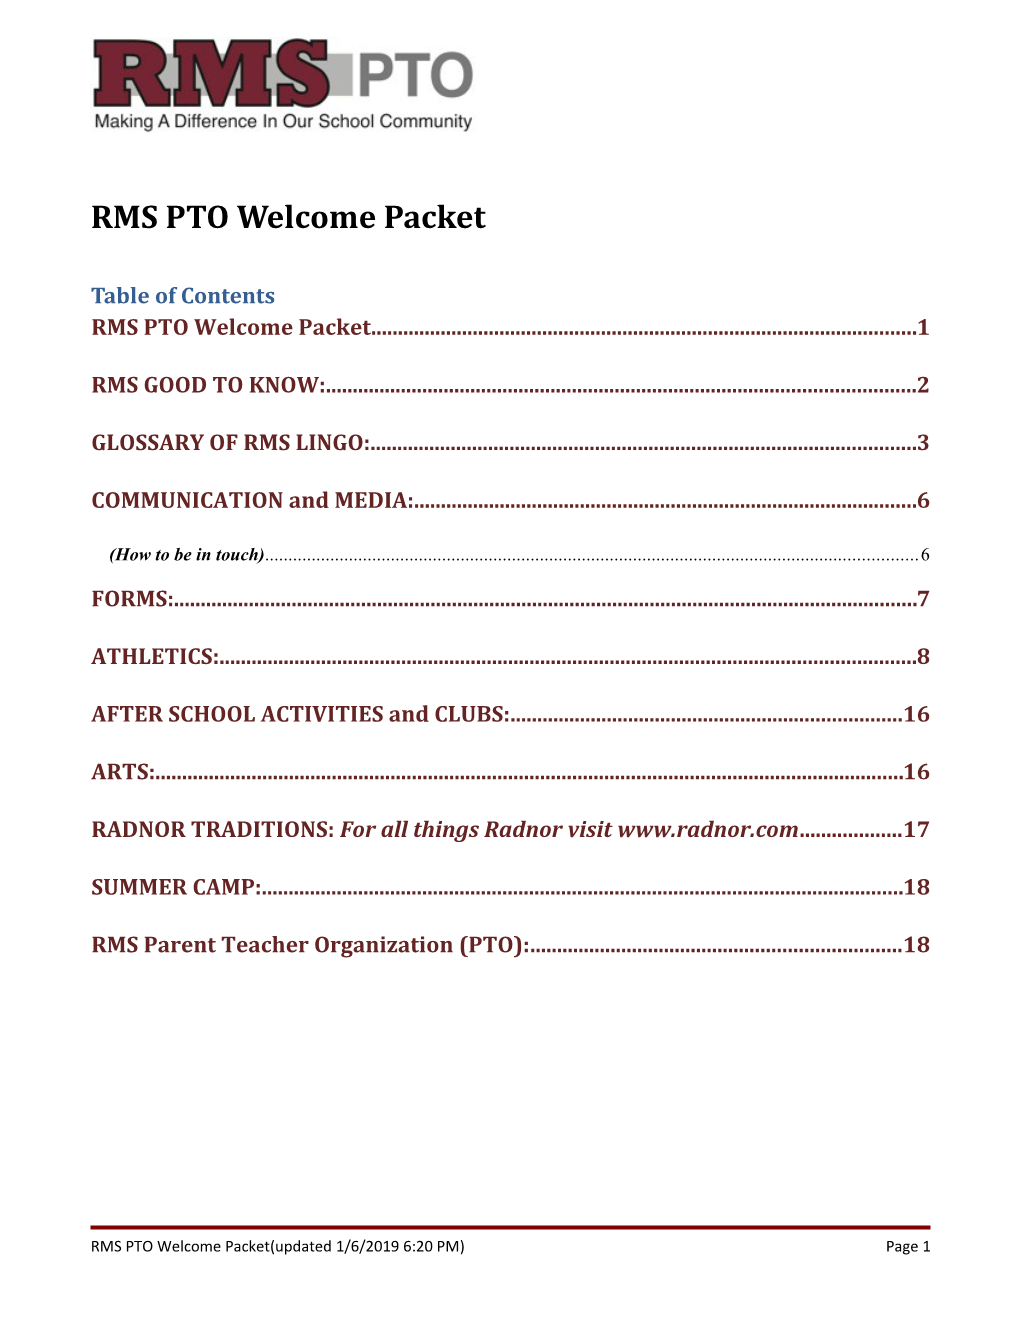 RMS PTO Welcome Packet